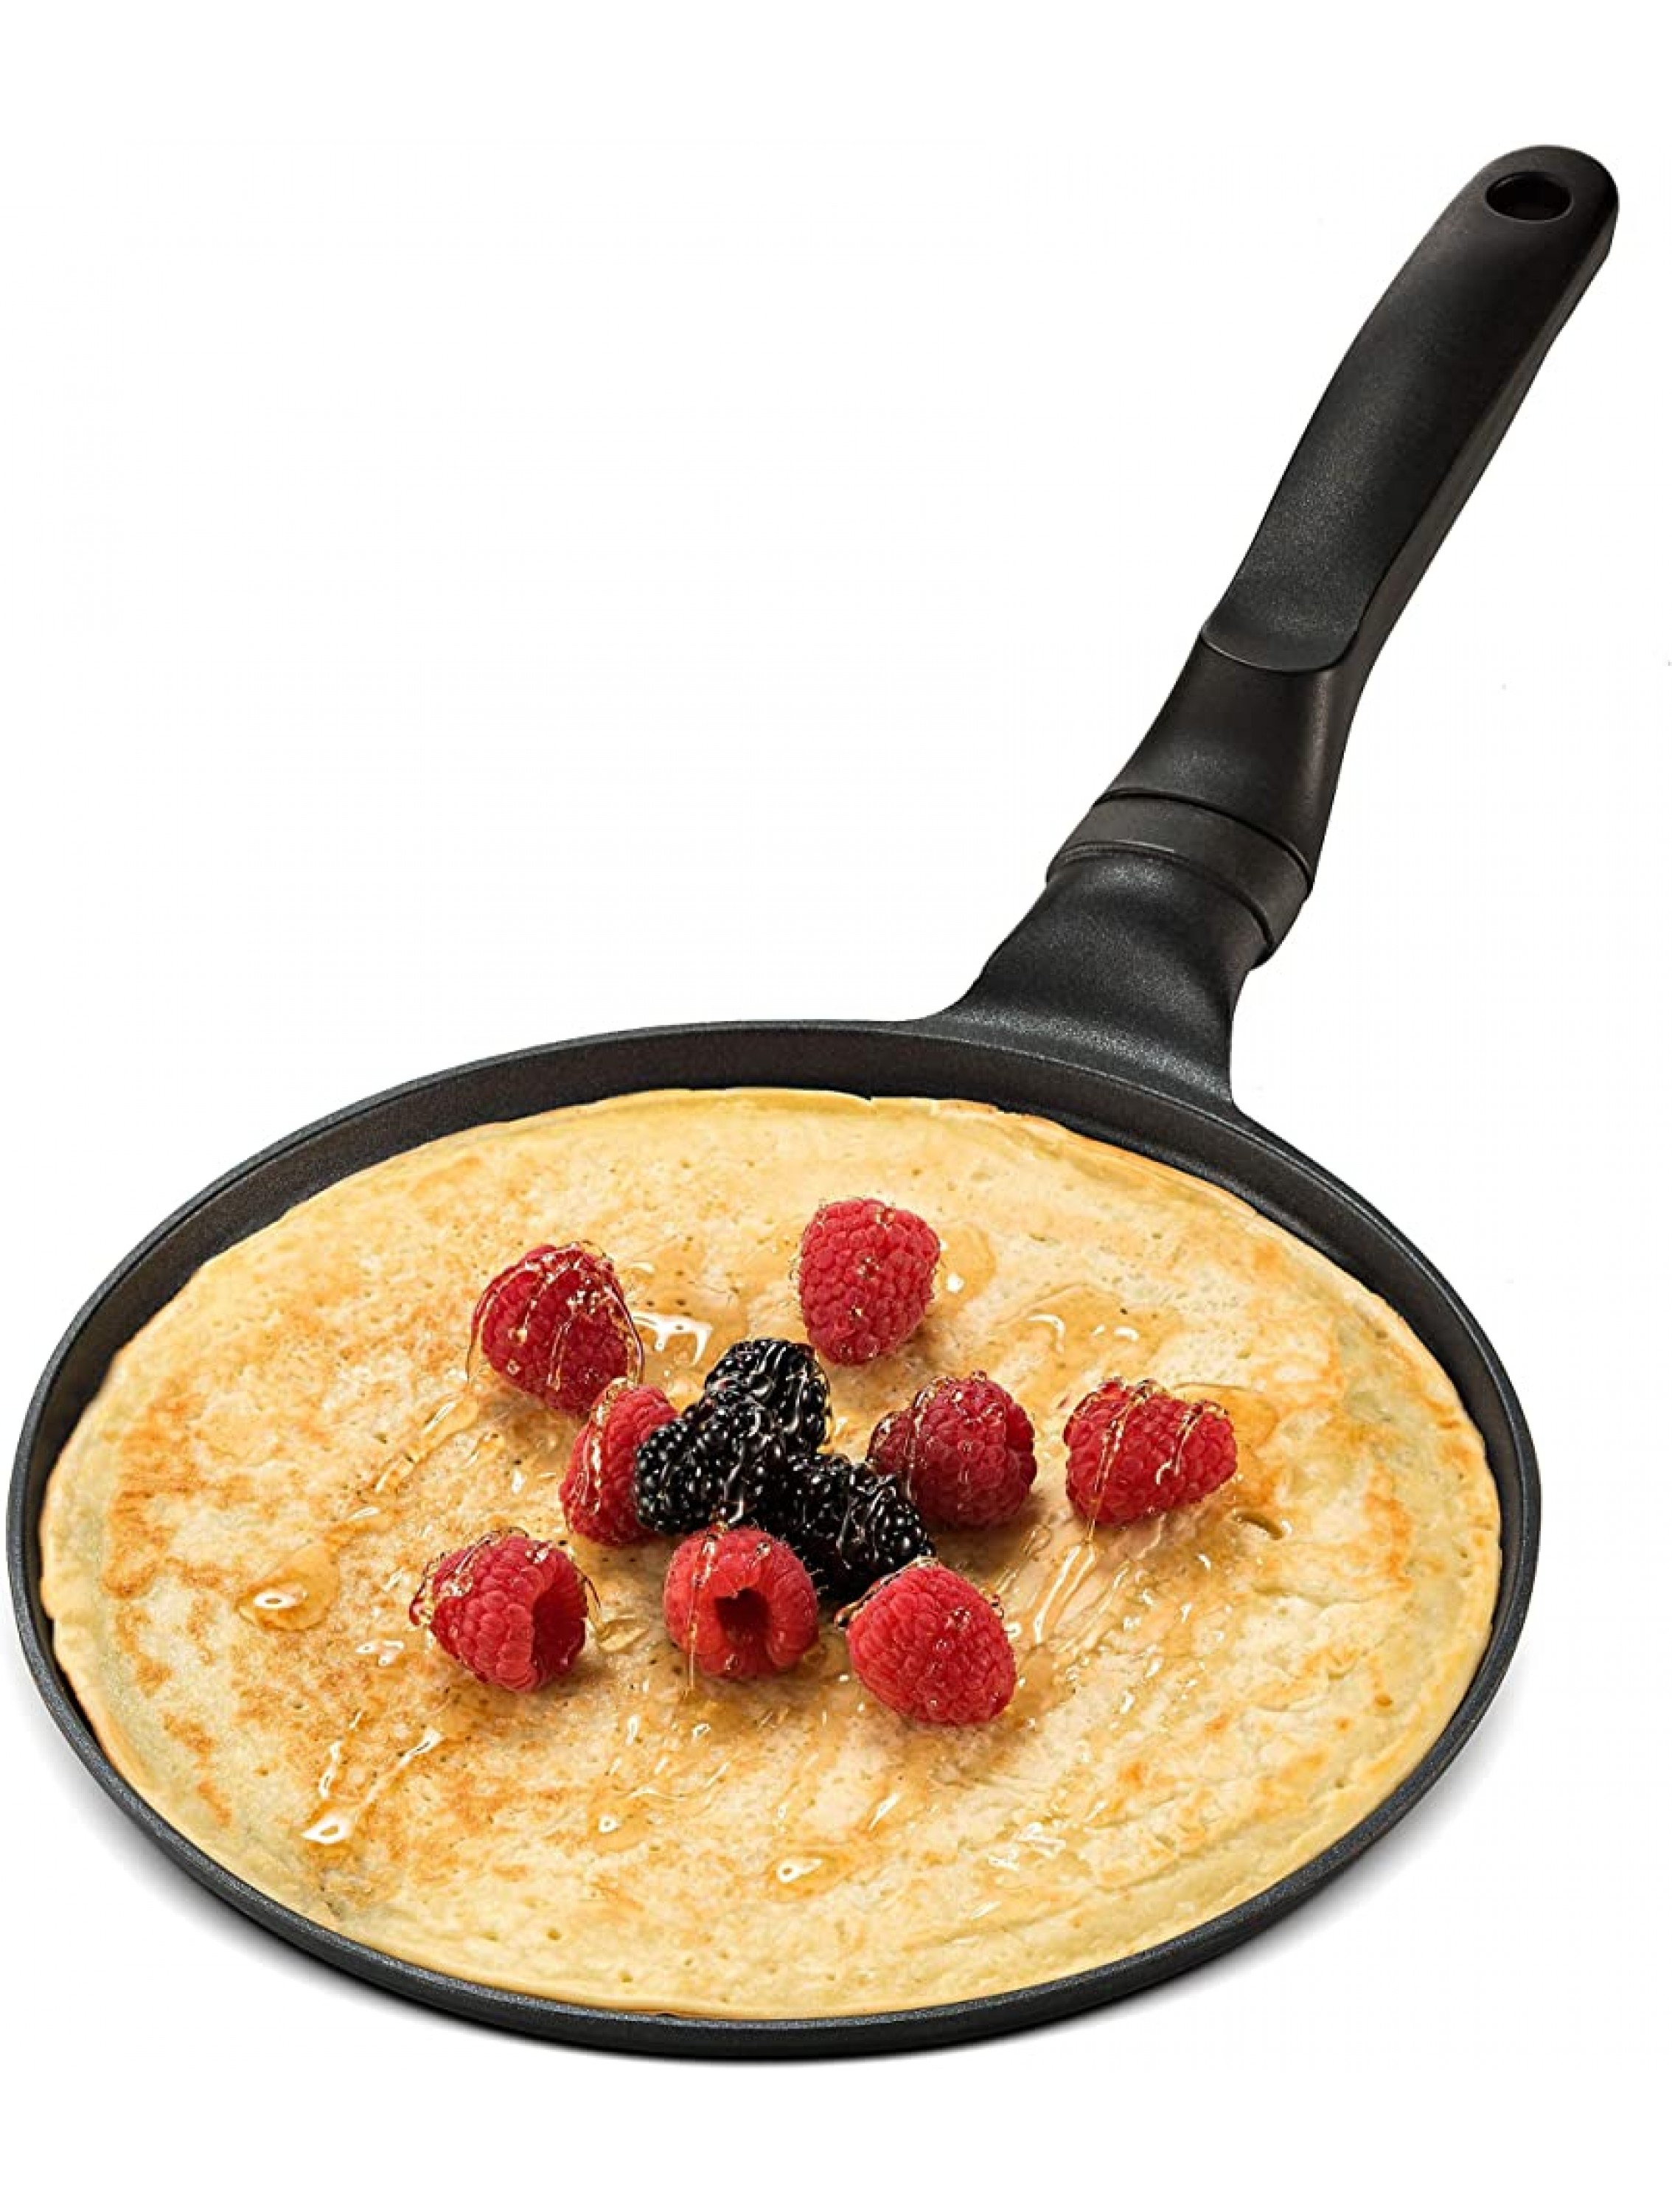 GOURMEX Black Induction Crepe Pan With PFOA Free Nonstick Coating | Ideal Induction Pan for Egg Omelet and Flat Pancake | Cookware Compatible With All Heat Sources | Dishwasher Safe 9.5 - BZ70G3IW3